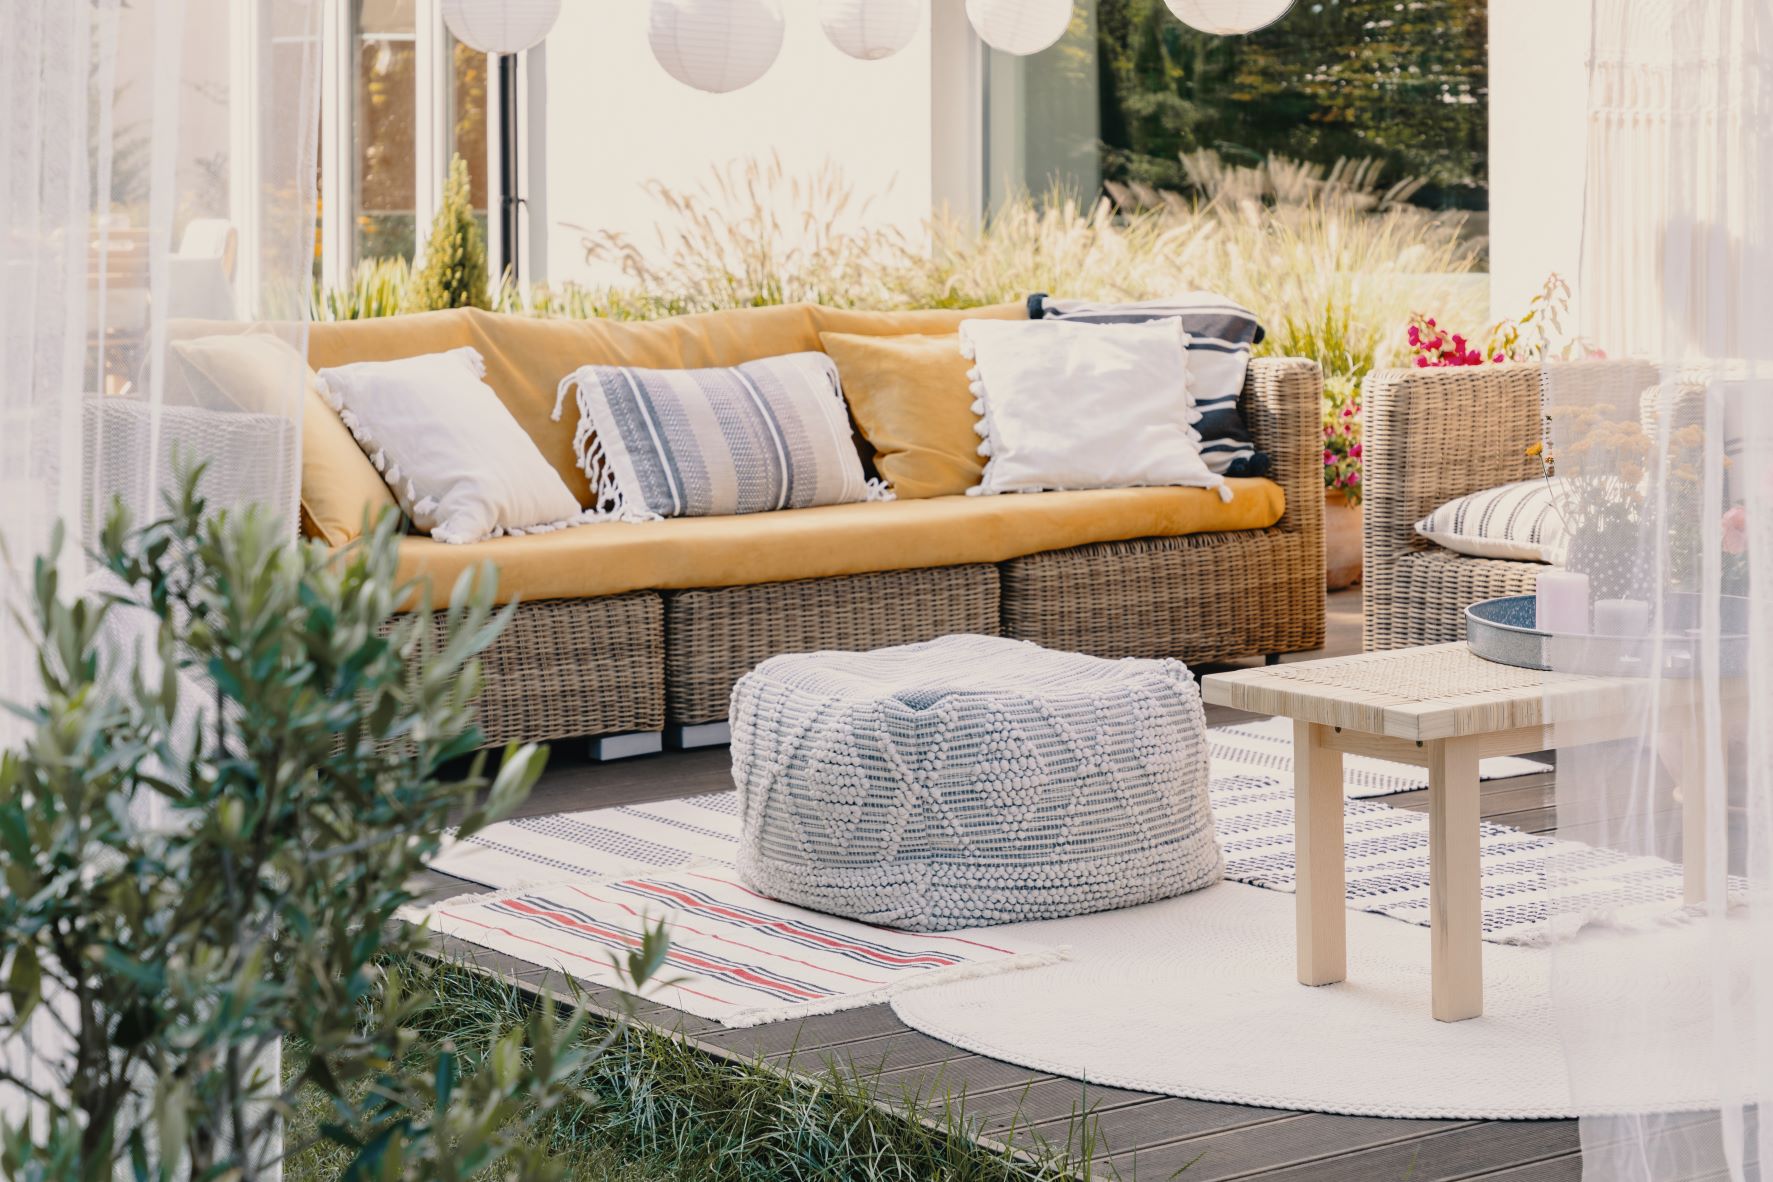 The Top Affordable Eco-Friendly Outdoor Furniture Brands - No1 Property Guide